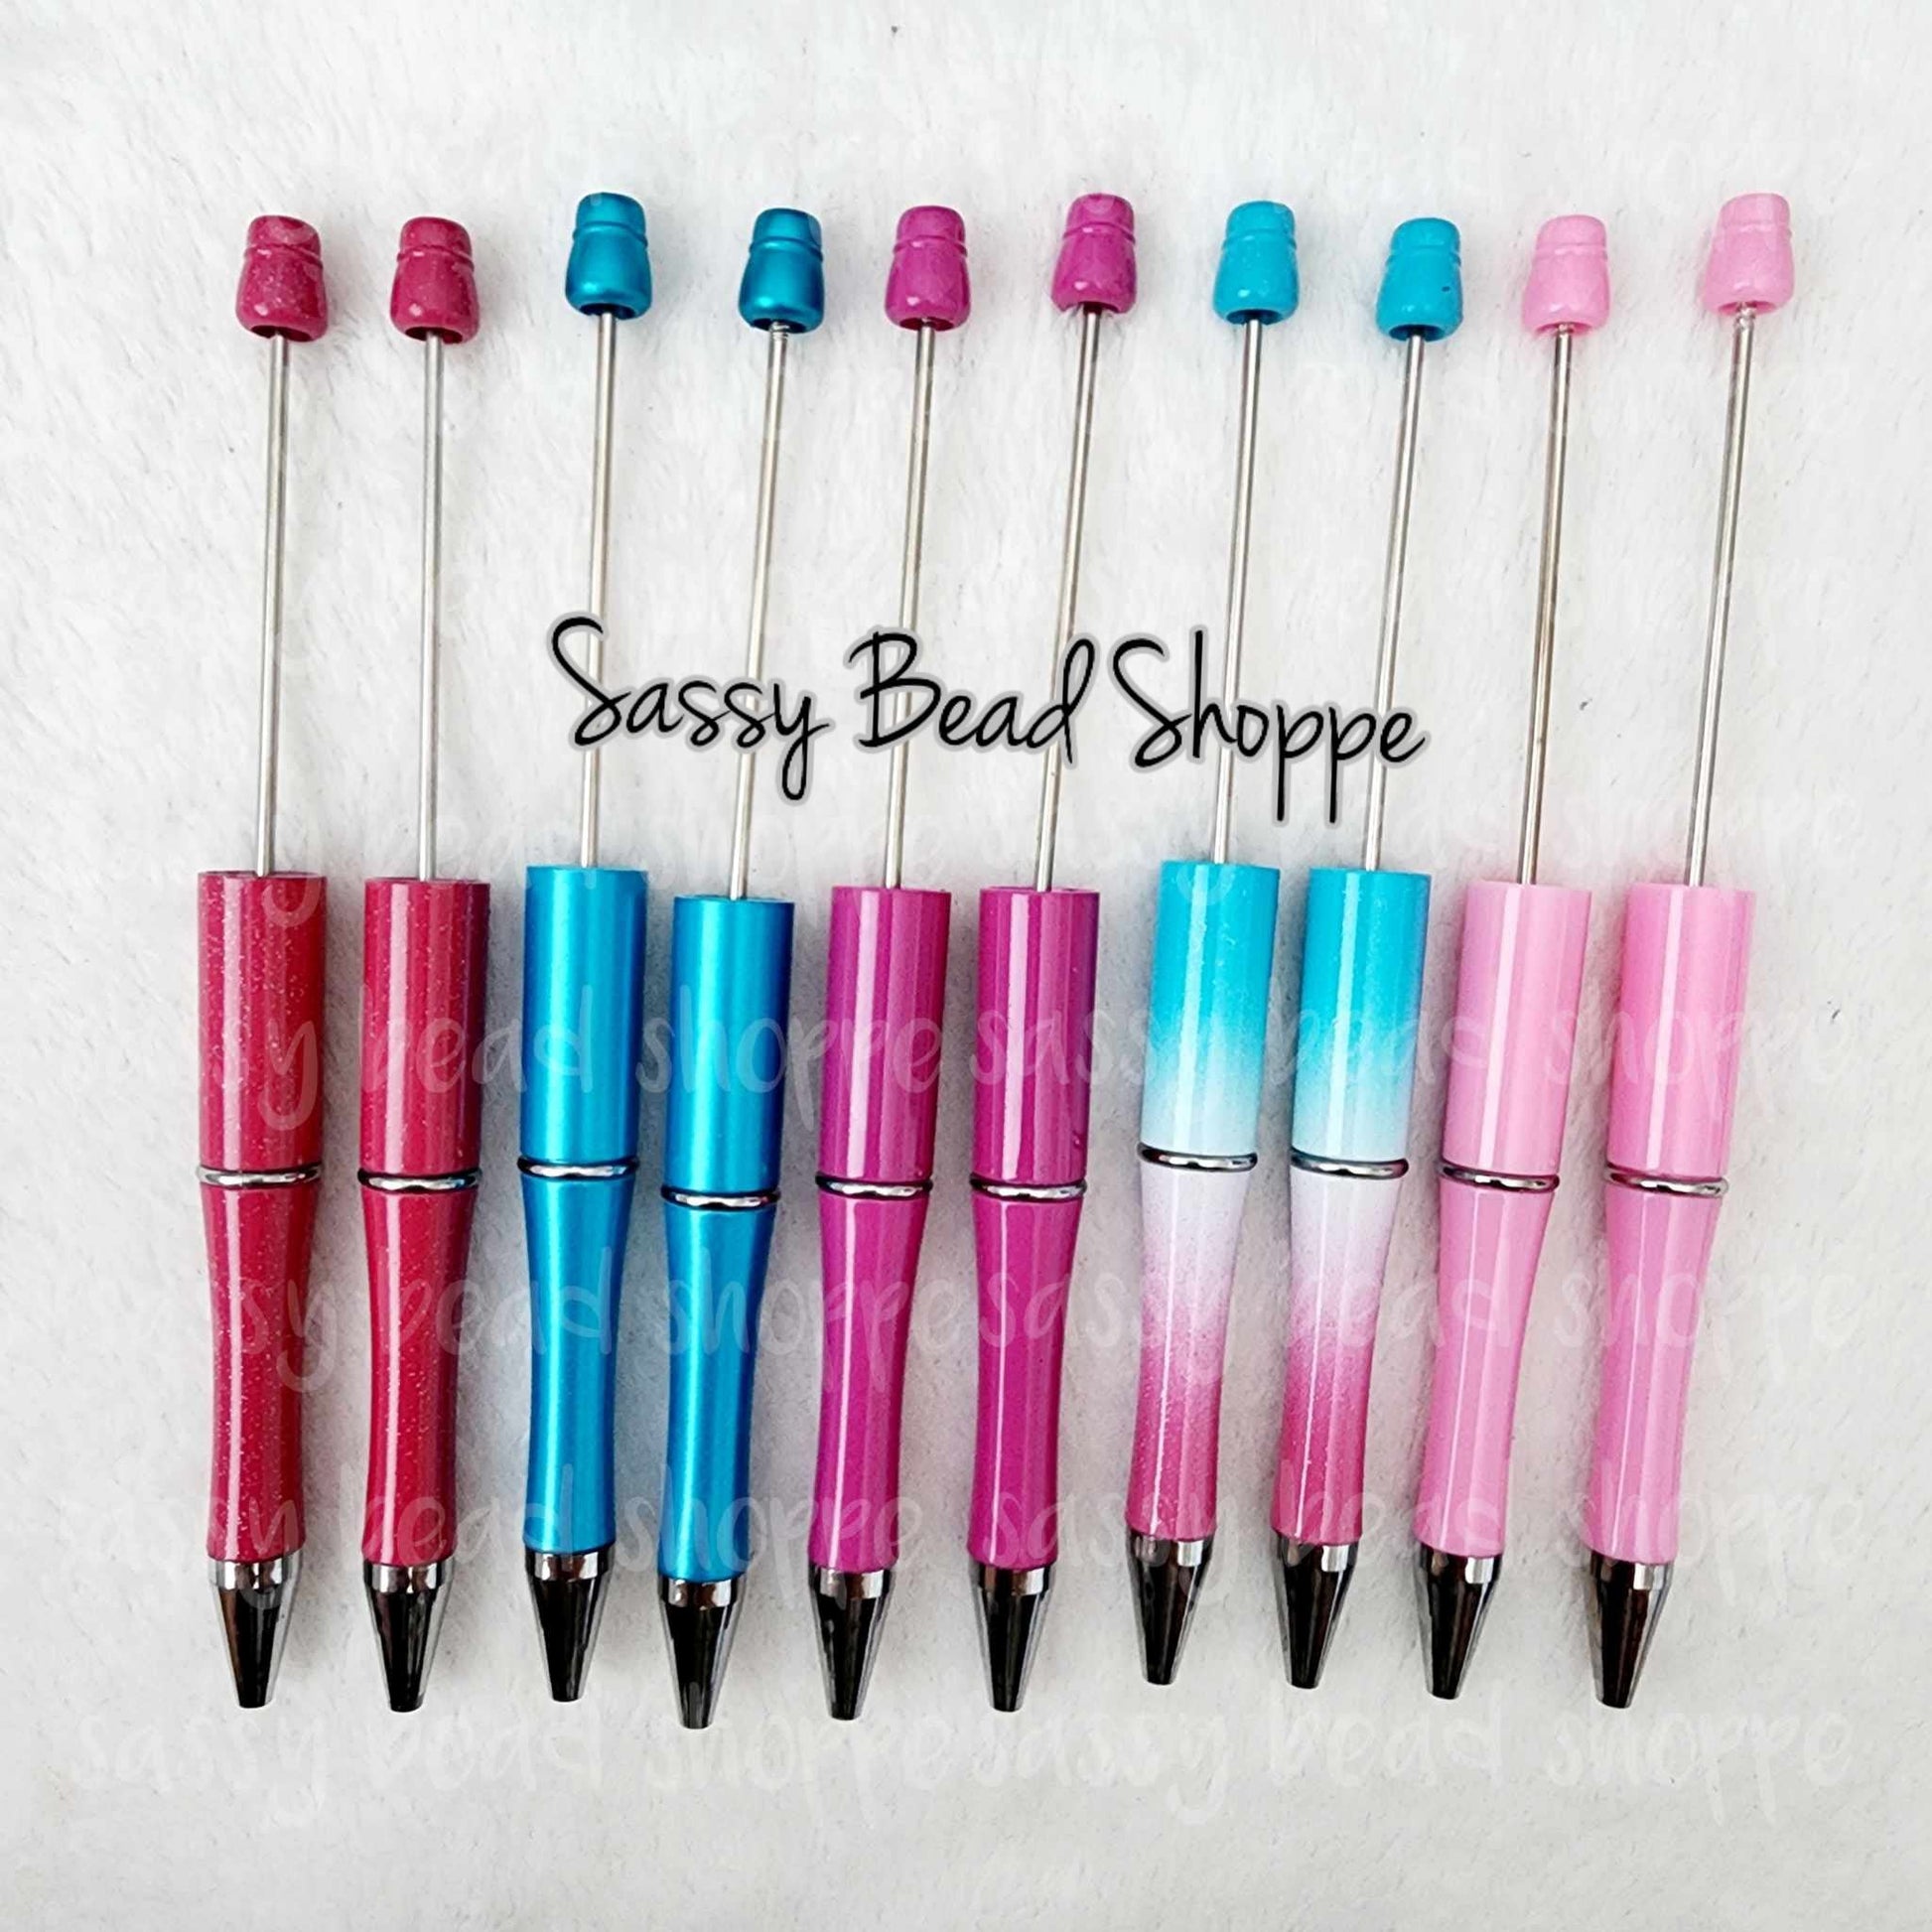 Sassy Bead Shoppe Berry Fun Pen Pack Pack of 10